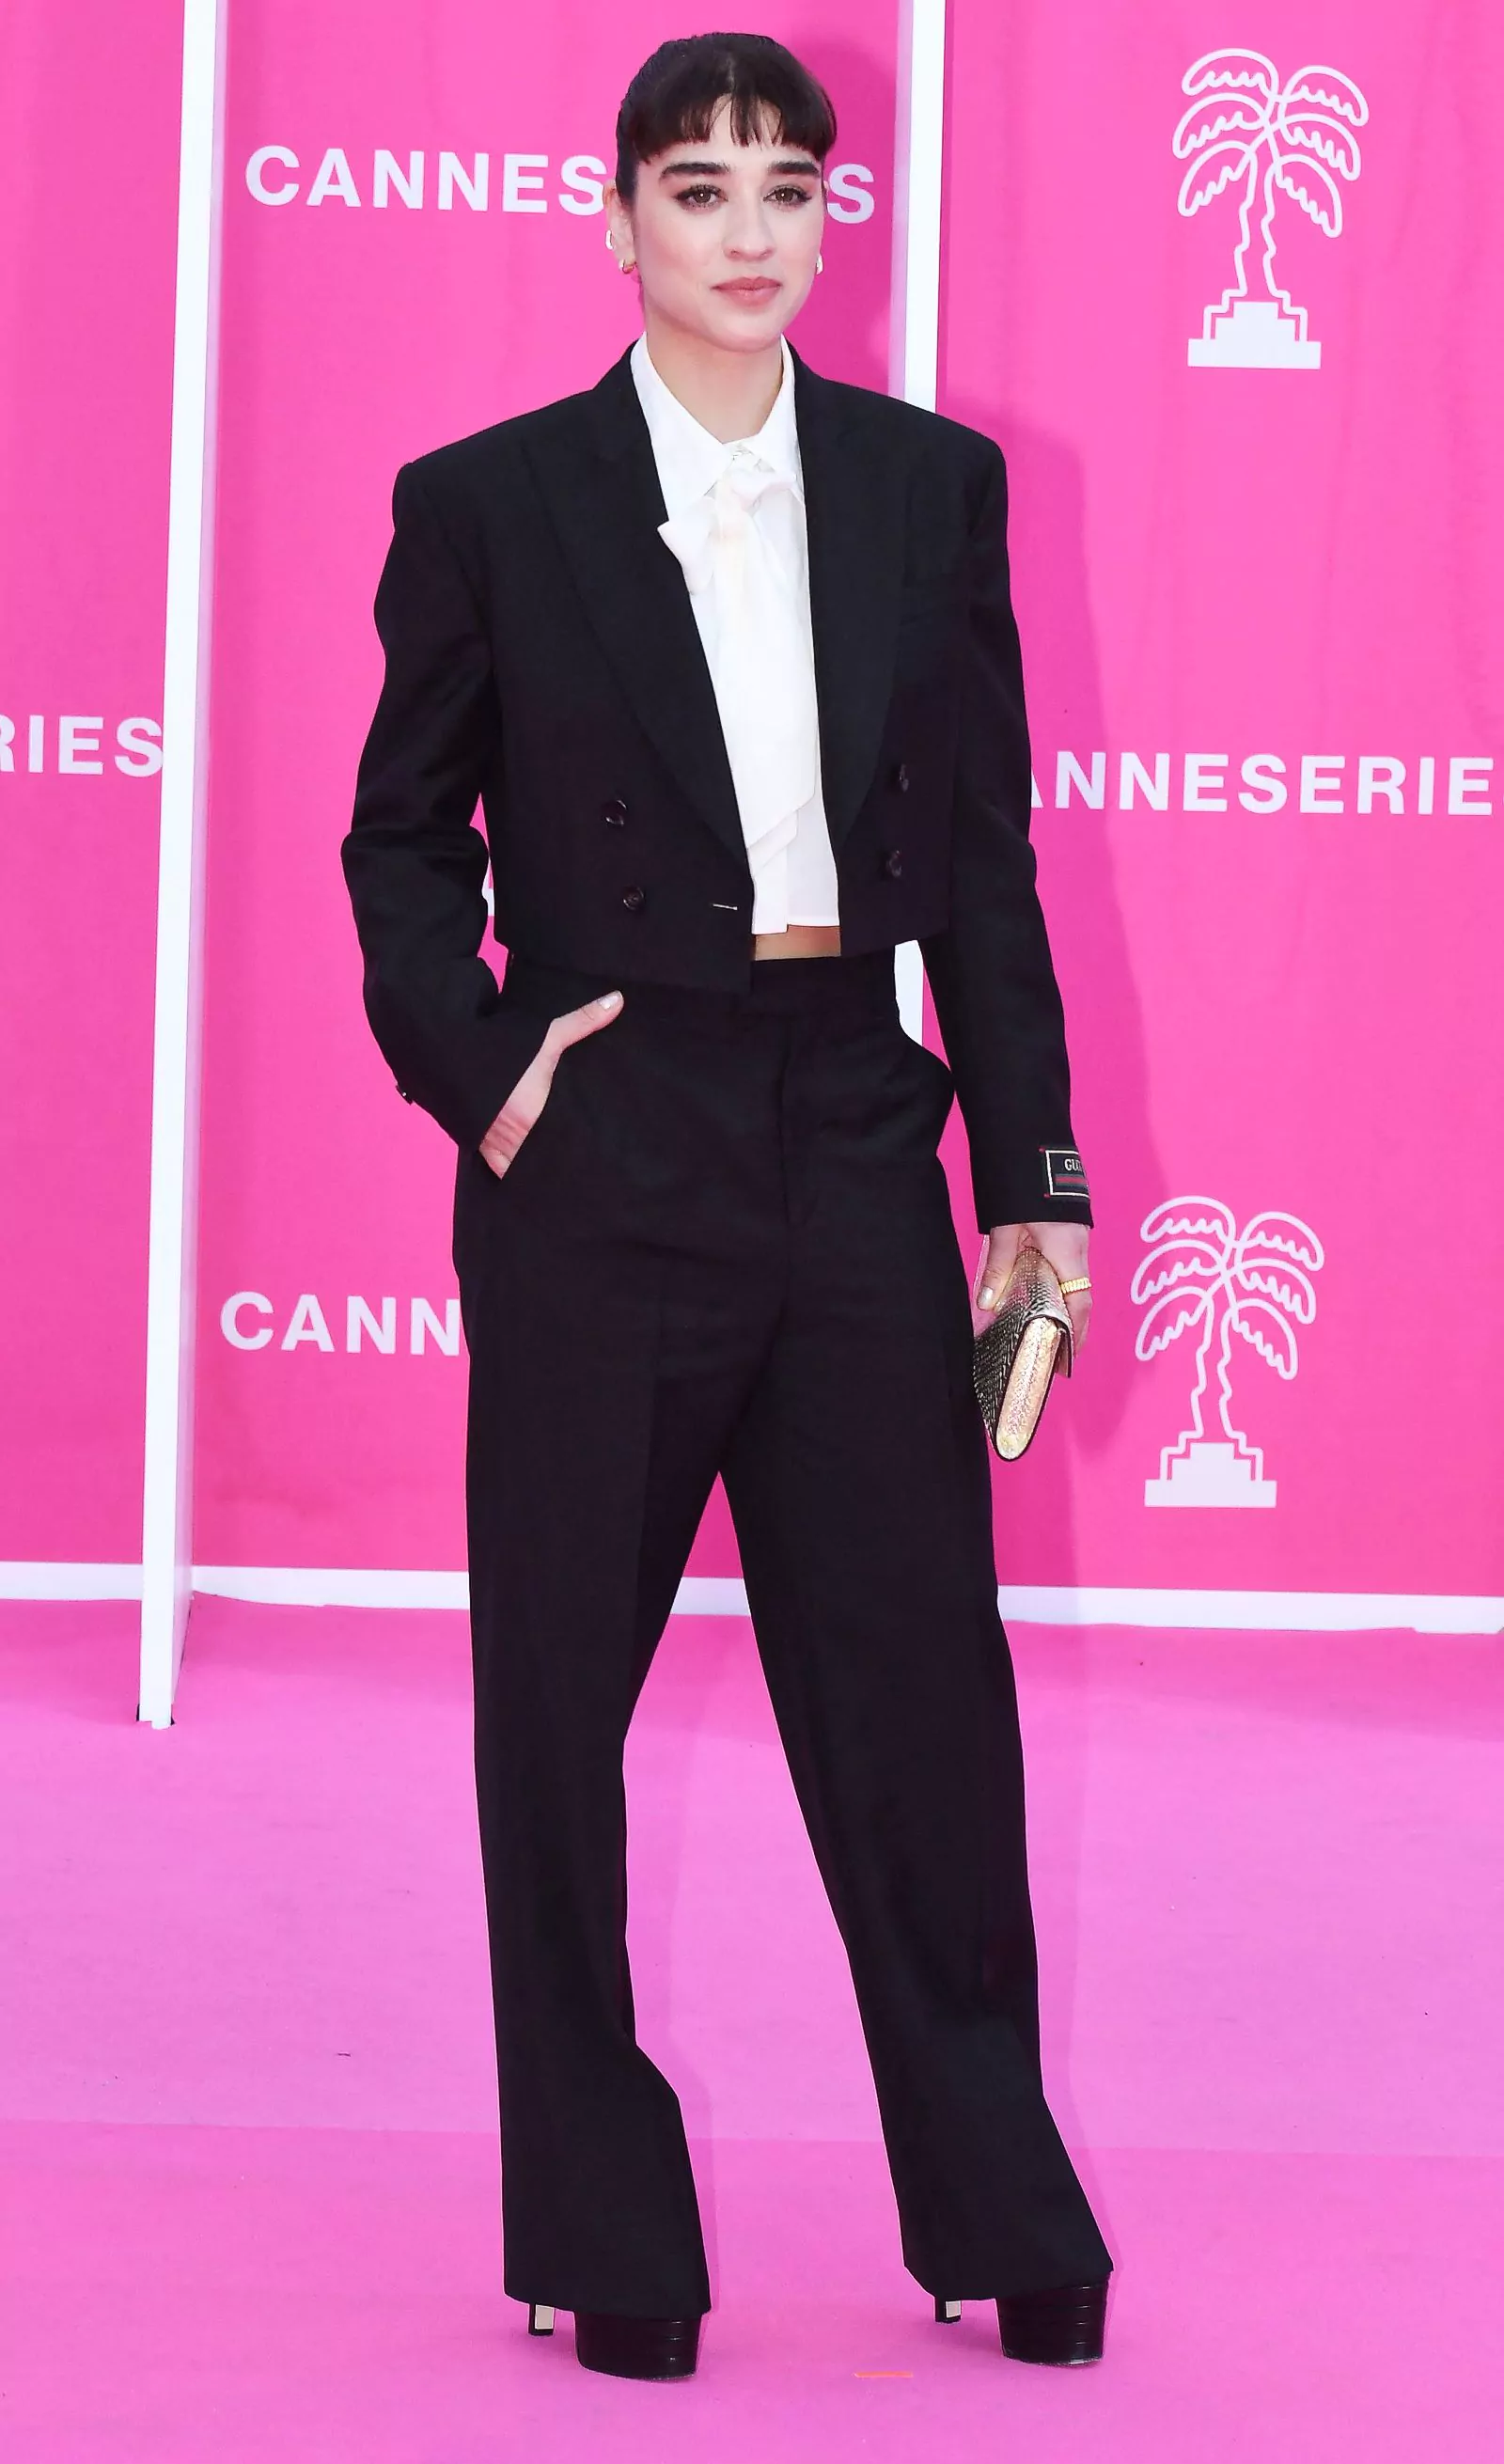 Simone Tabasco at the 6th Canneseries 2023 International Festival of Series in Cannes, April 14, 2023